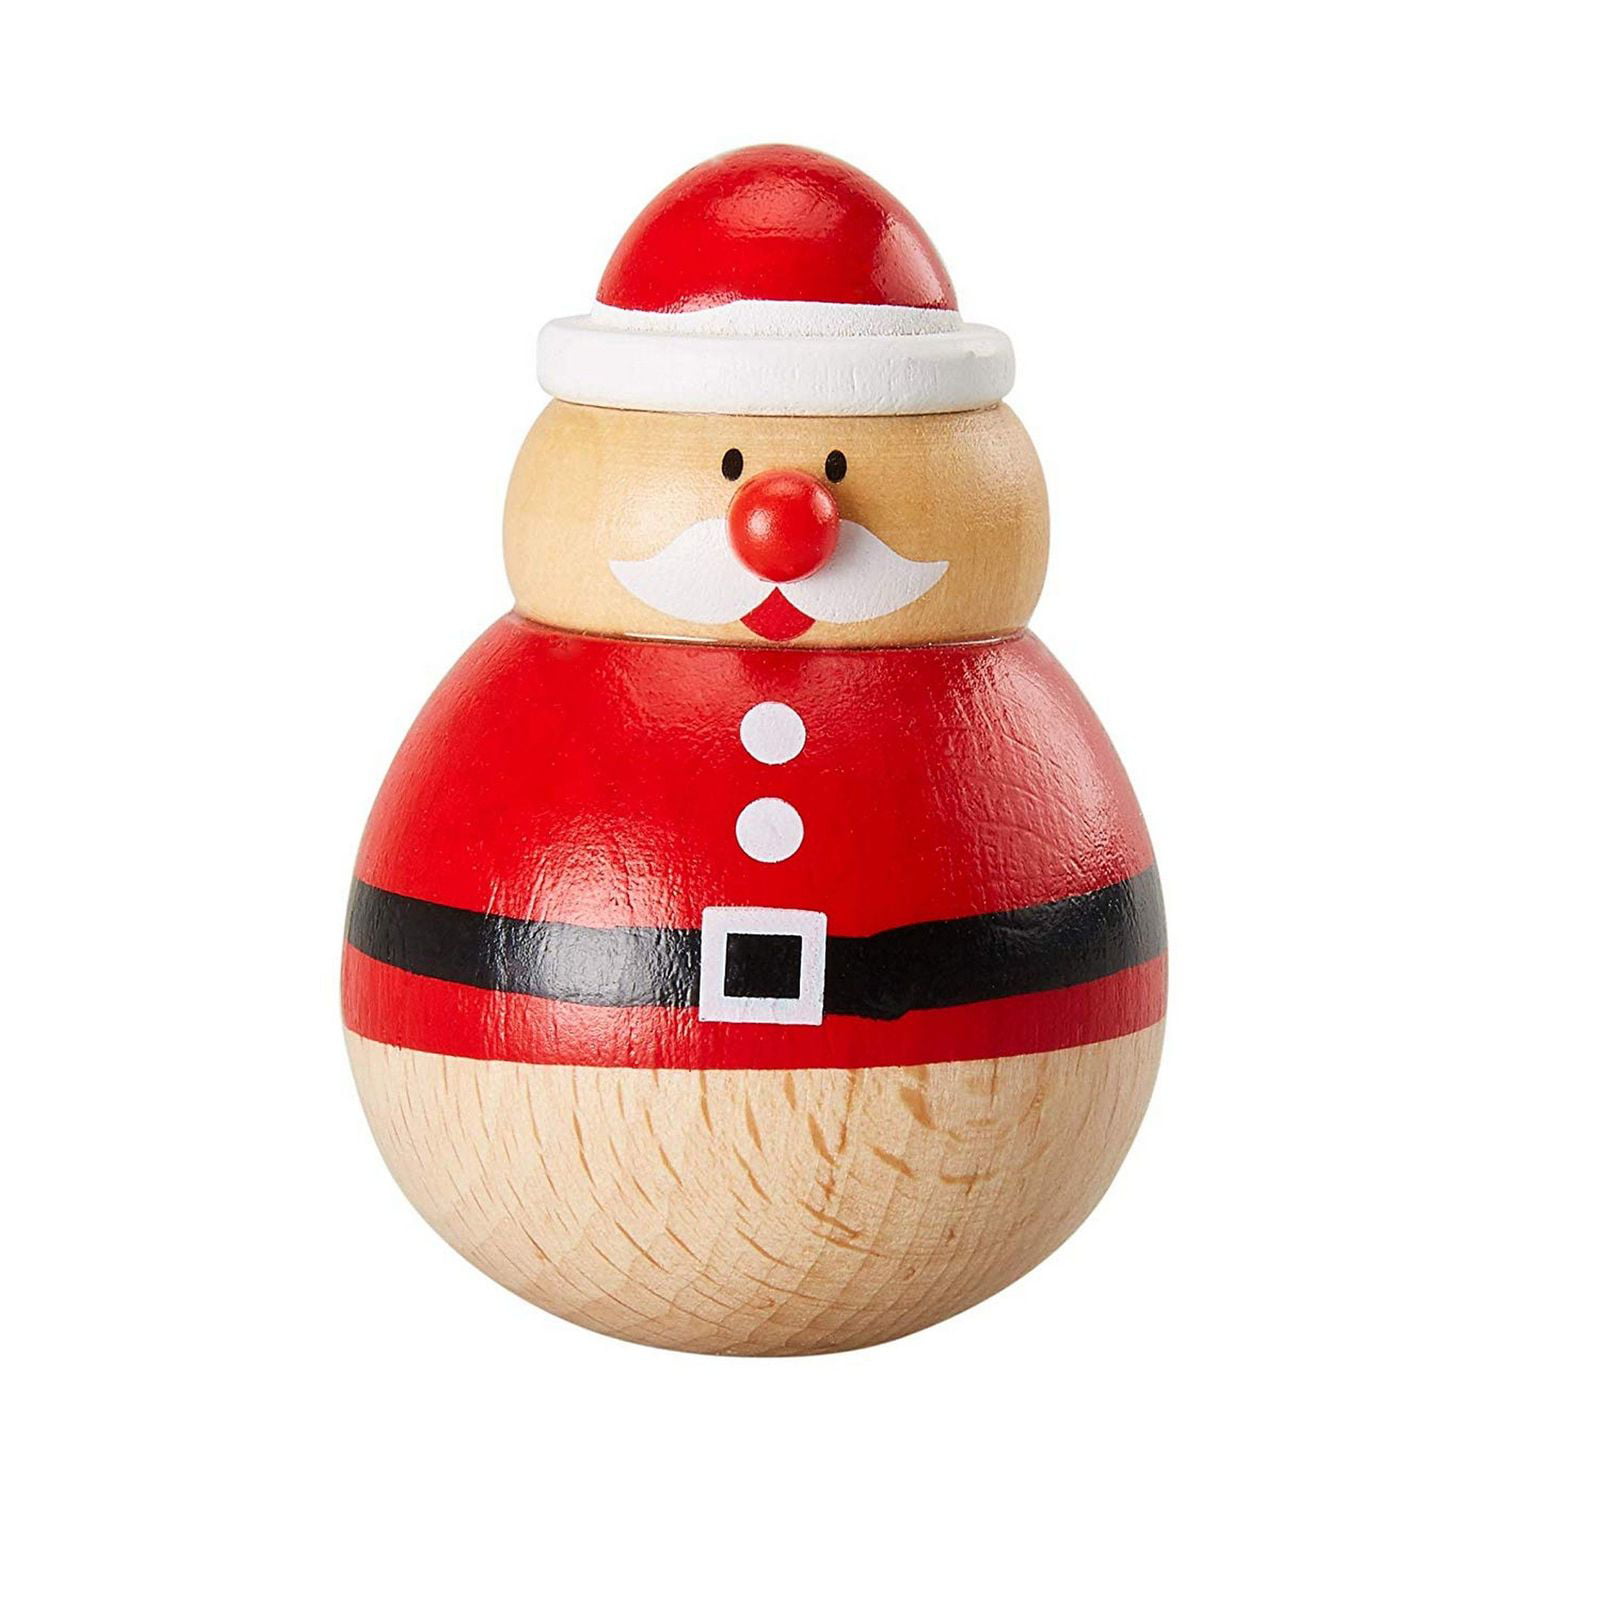 Snowman Reindeer Santa Design Christmas Roly Poly Toy 3-Pack Wooden Tumbler Doll Figurines Home Holiday Doll Decoration Desk Top Table 1.64 x 1.64 x 2.3 Inches Office